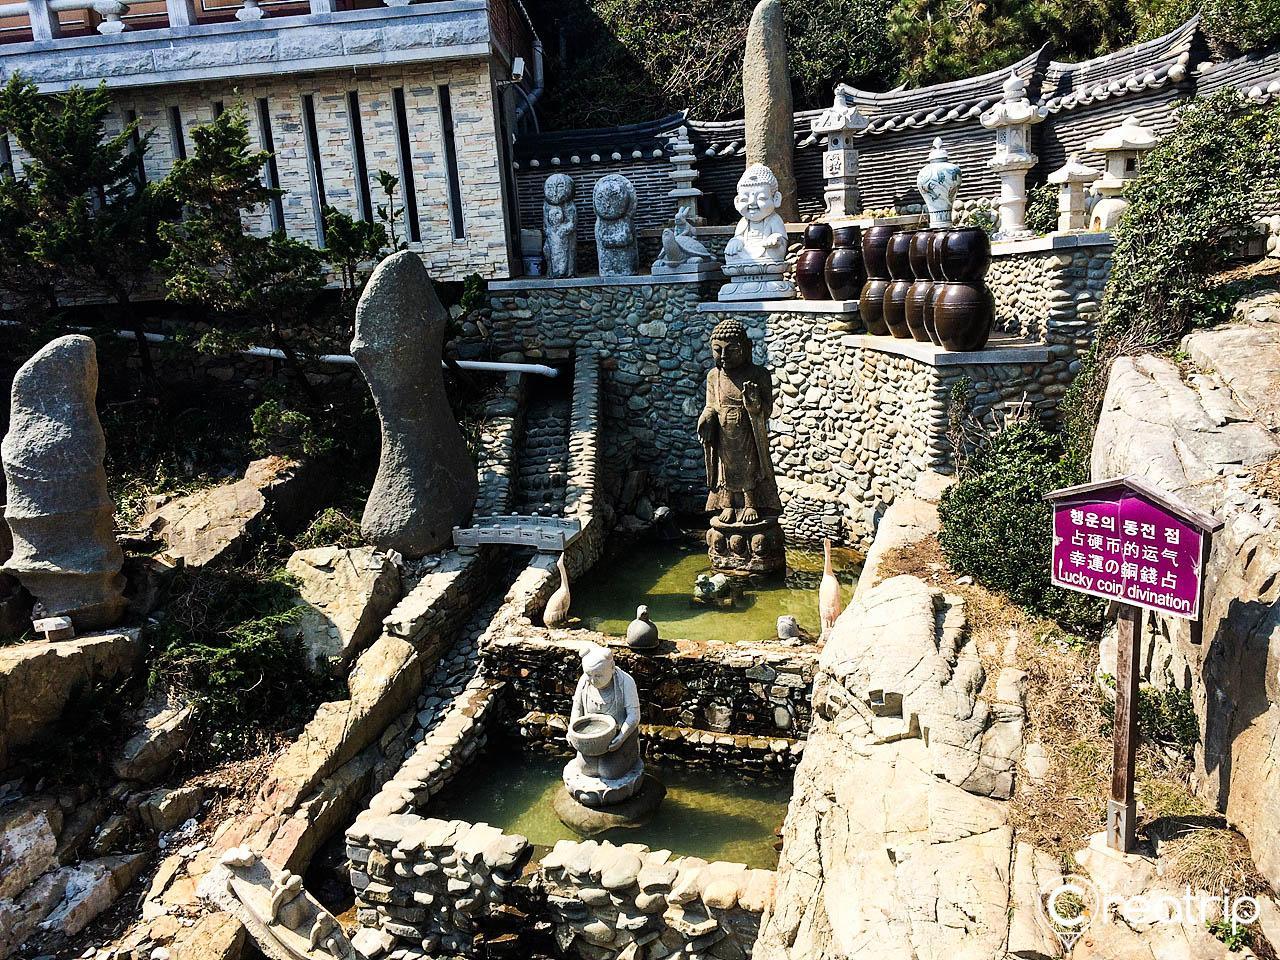 Scenic view of Haedong Yonggungsa Temple in Busan, featuring ancient architecture and lush green plants.